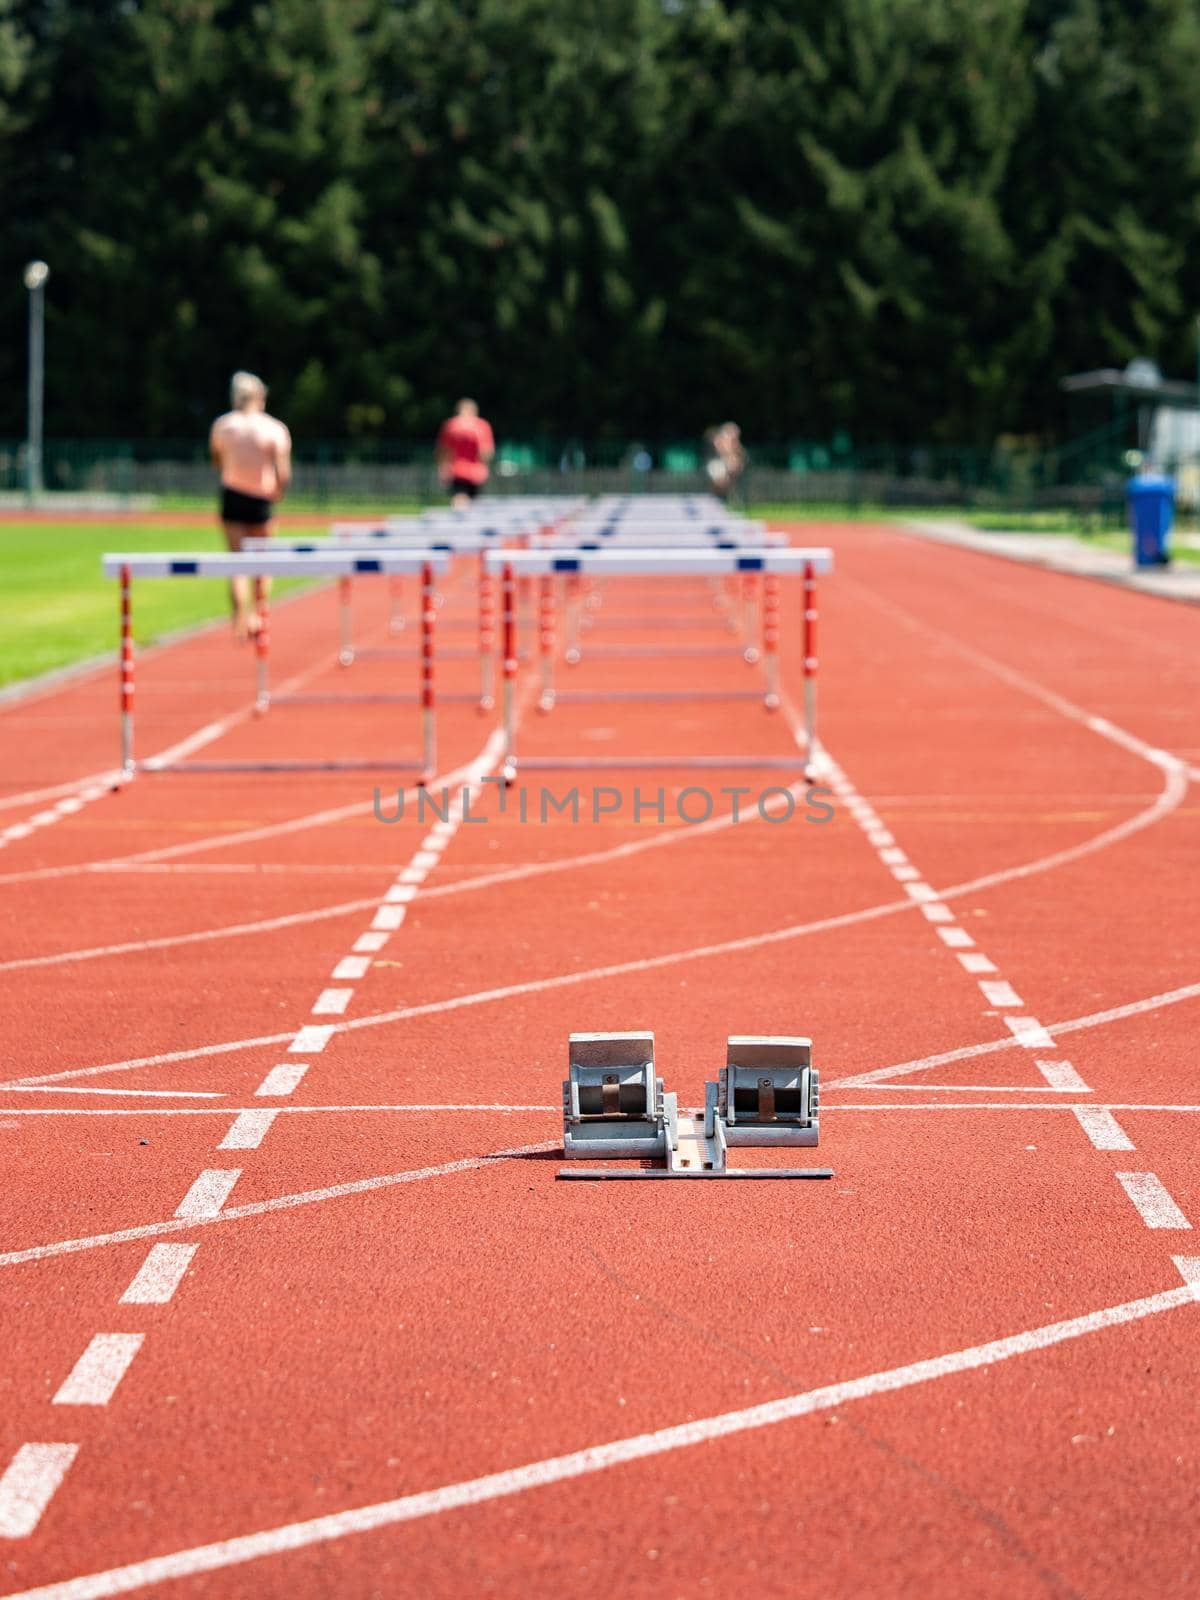 Obstacle course training. Athletics Starting Blocks and red running tracks in a stadion